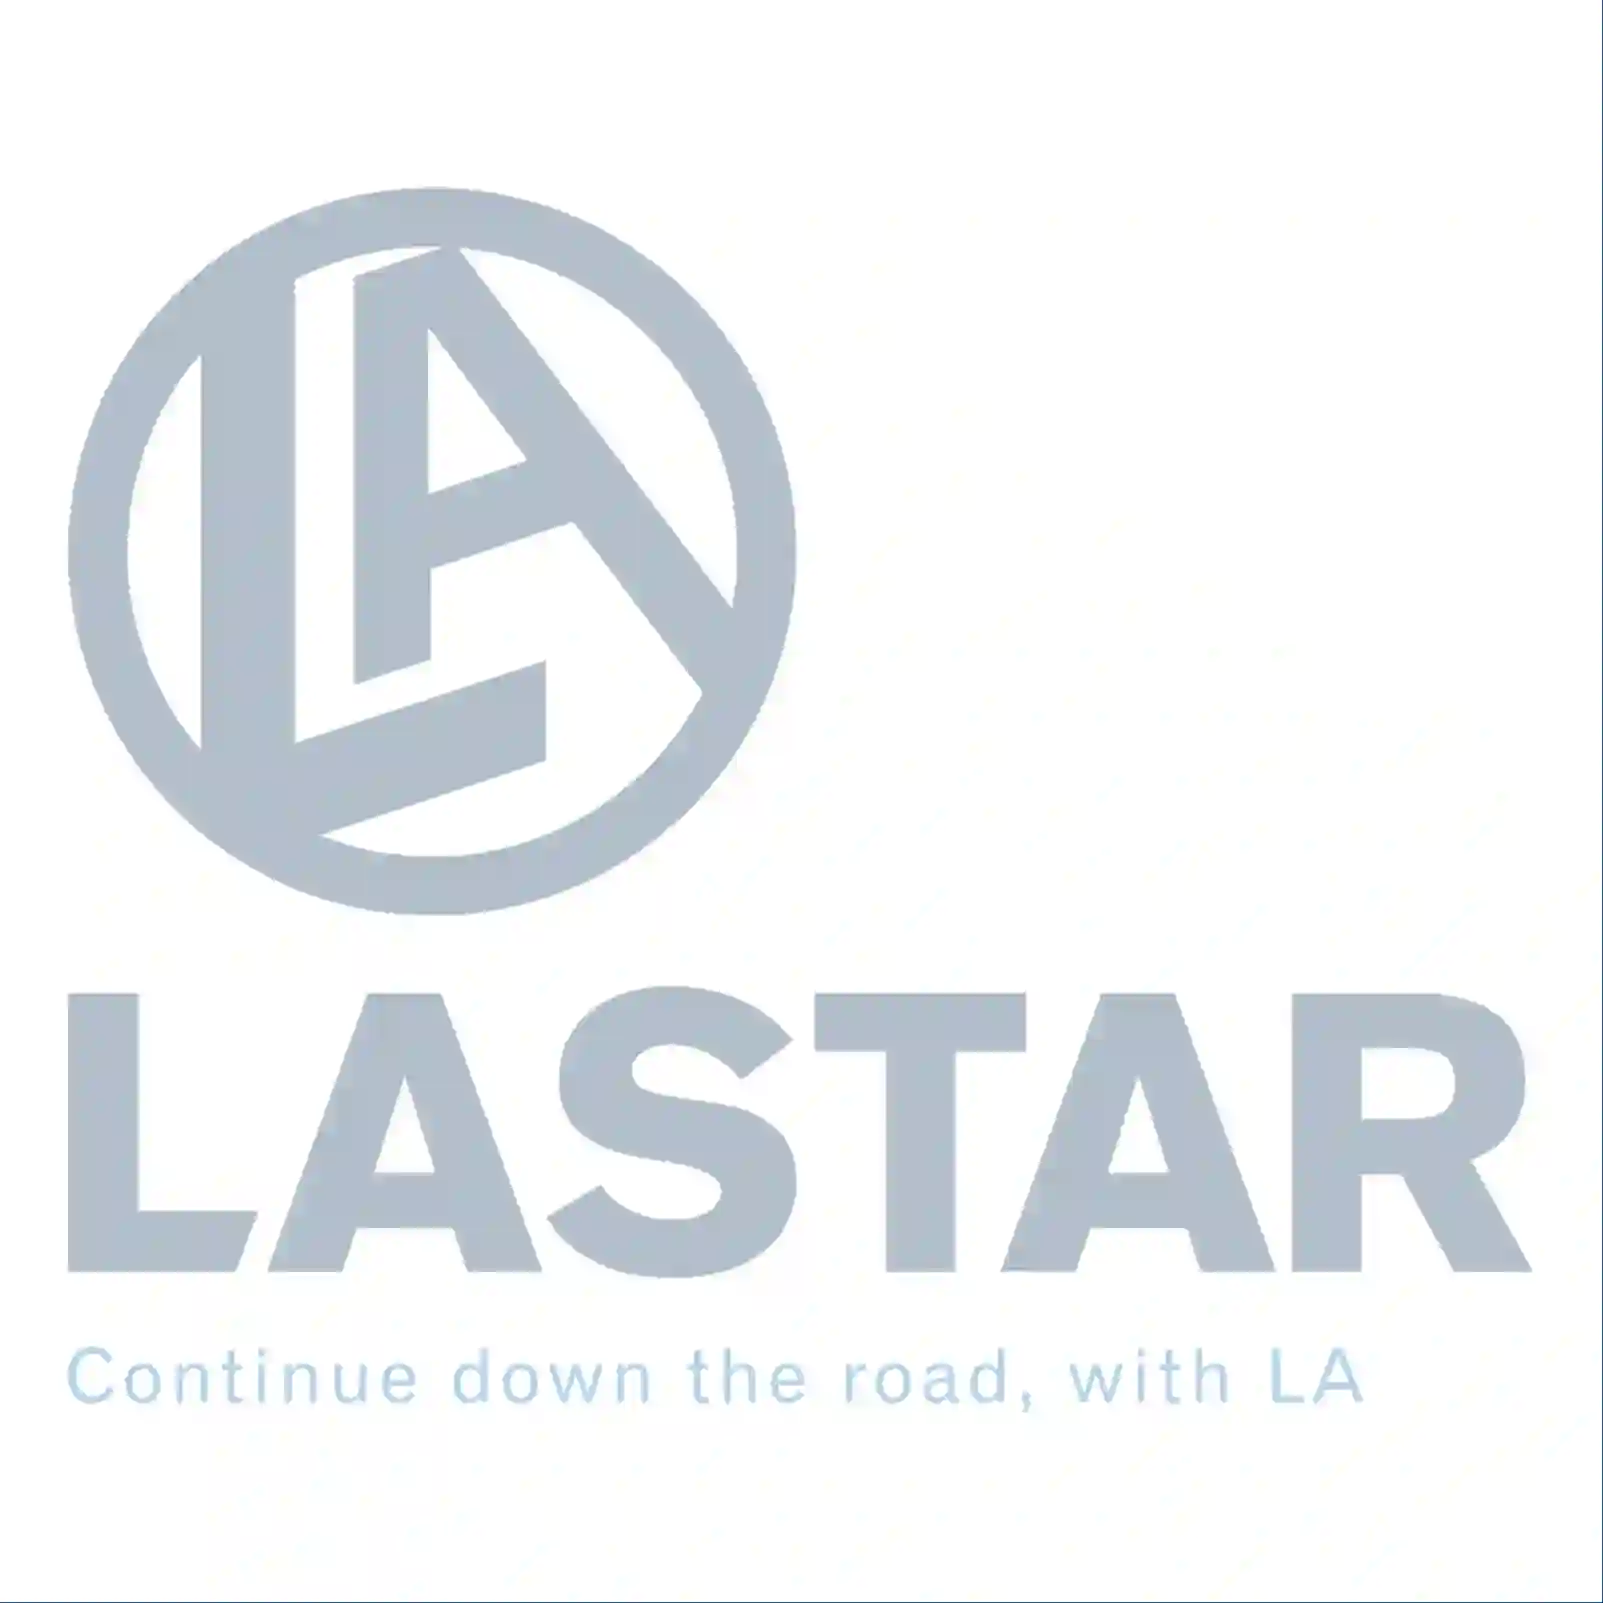  Stay, stabilizer || Lastar Spare Part | Truck Spare Parts, Auotomotive Spare Parts